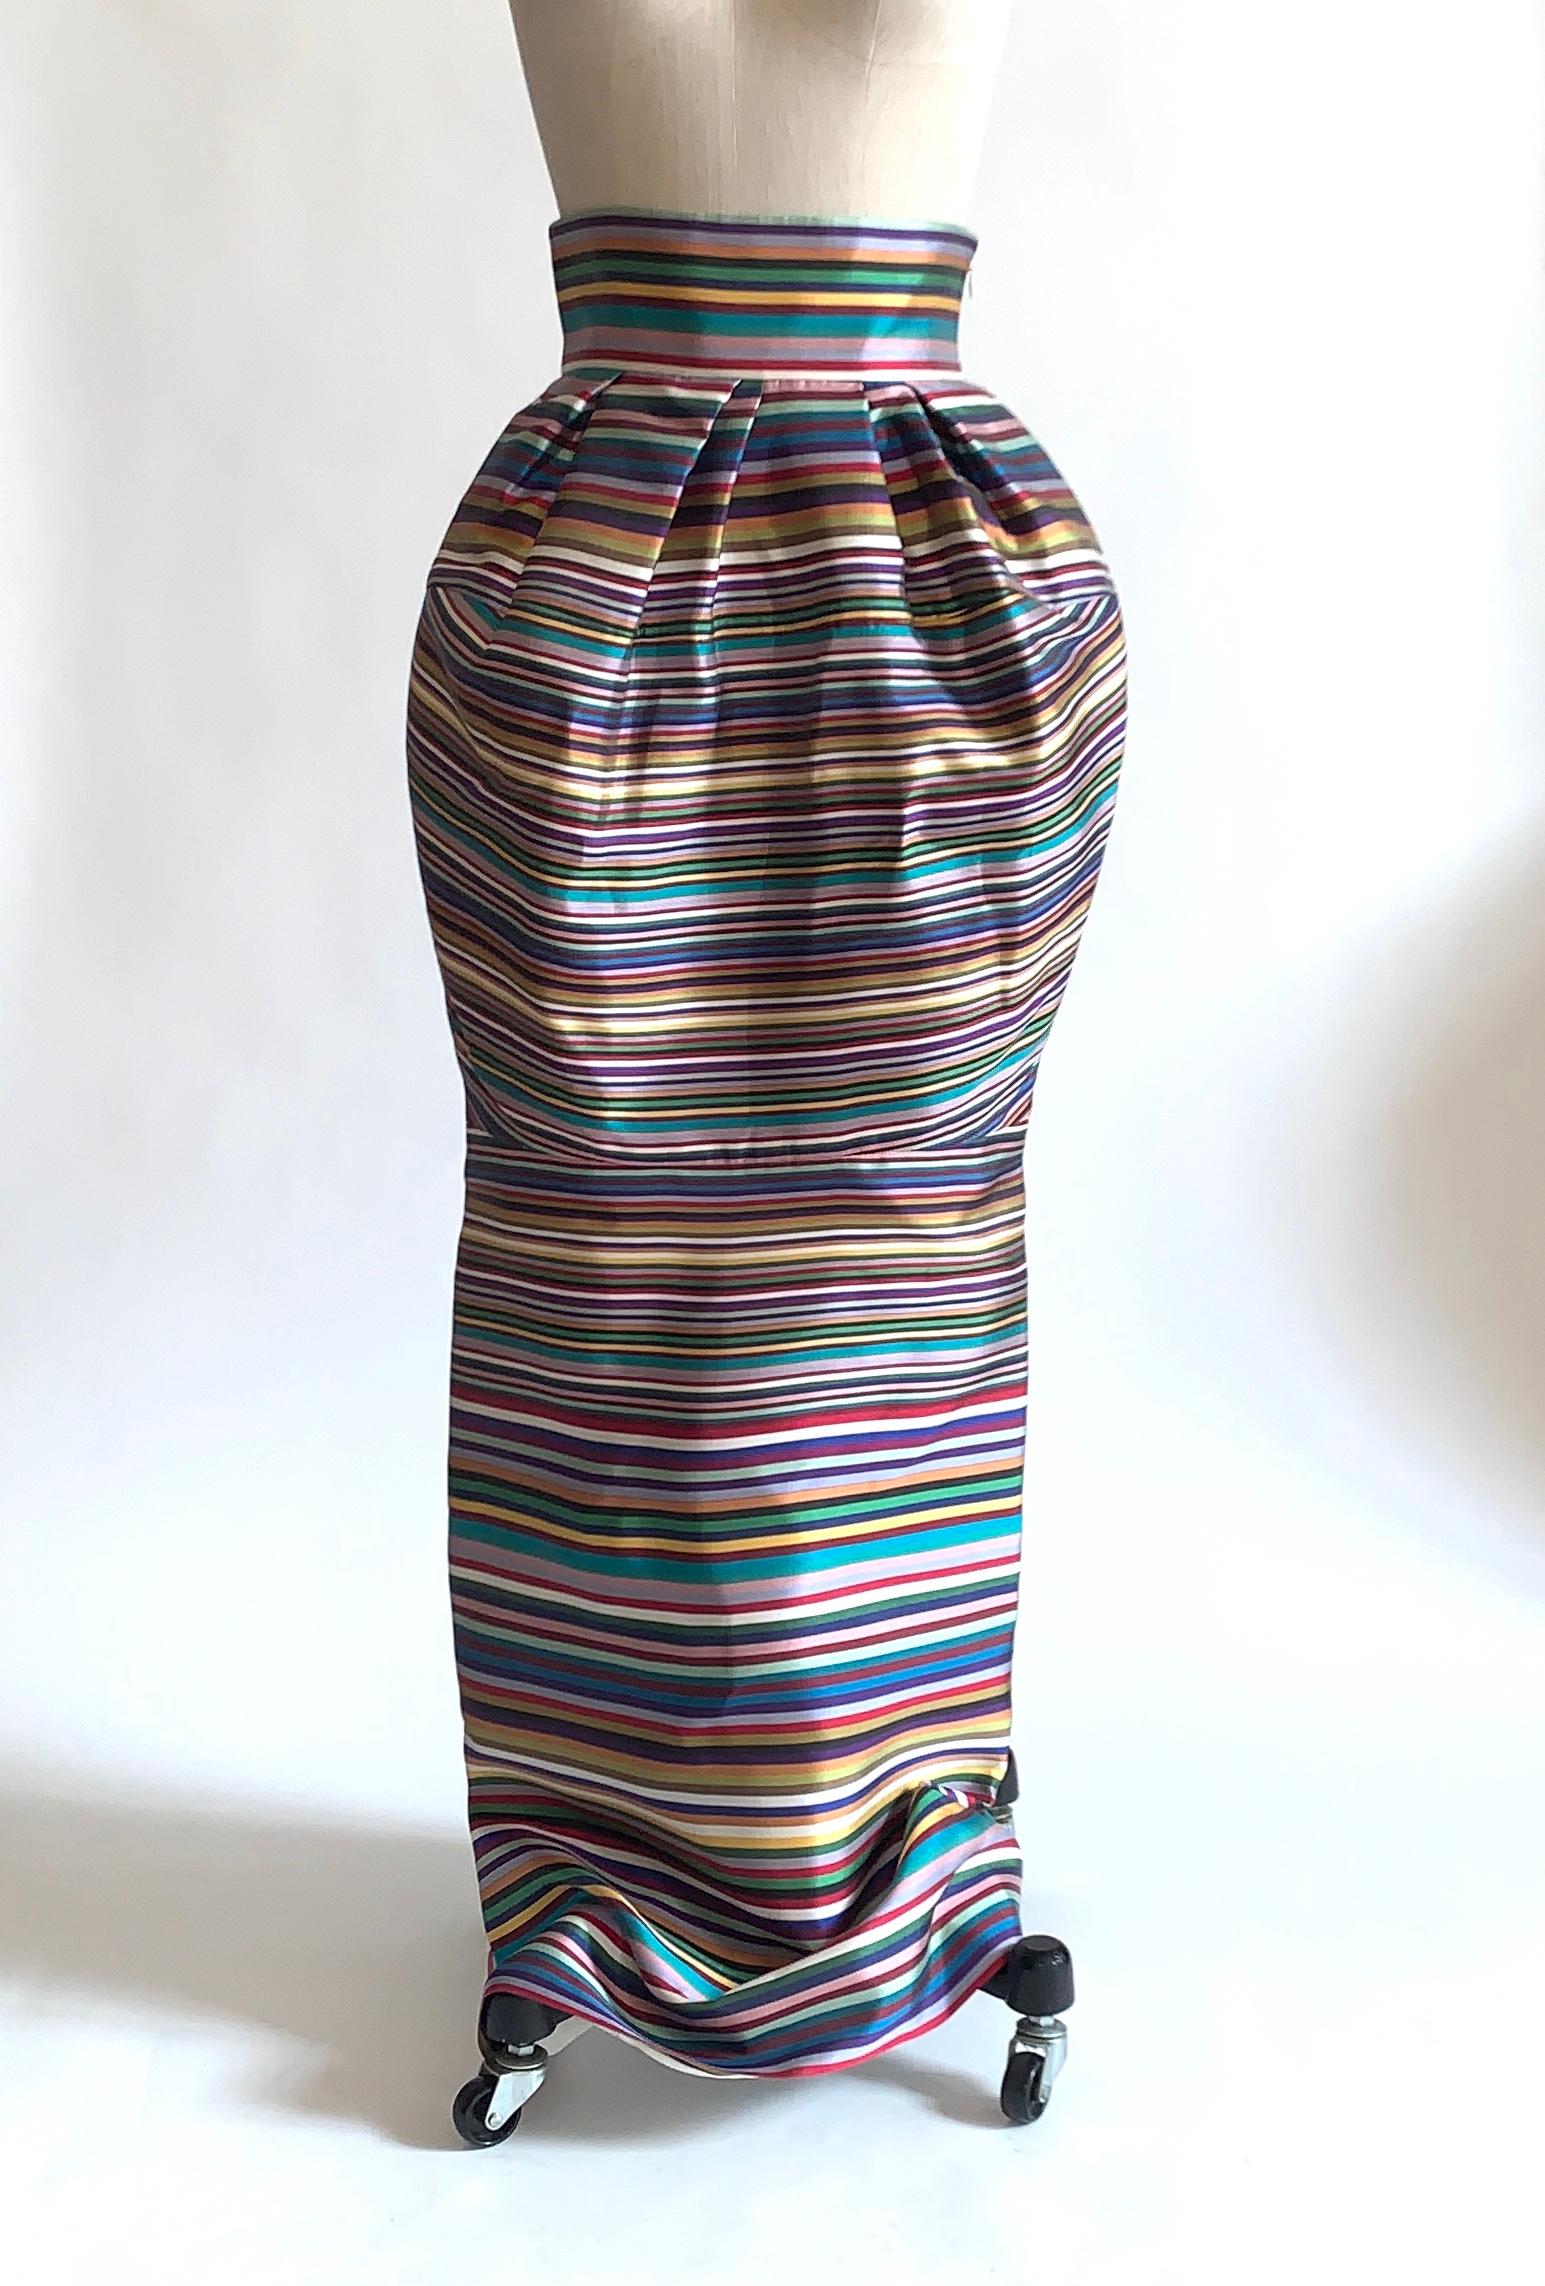 Christian Dior multicolor maxi skirt in a beautiful striped silk. Stripes in gold, purple, burgundy, green, navy and teal. Straight cut with voluminous bubble at hips. Side zip and hook and eye. 

Retailed at $4900.

100% silk.
Fully lined in 100%